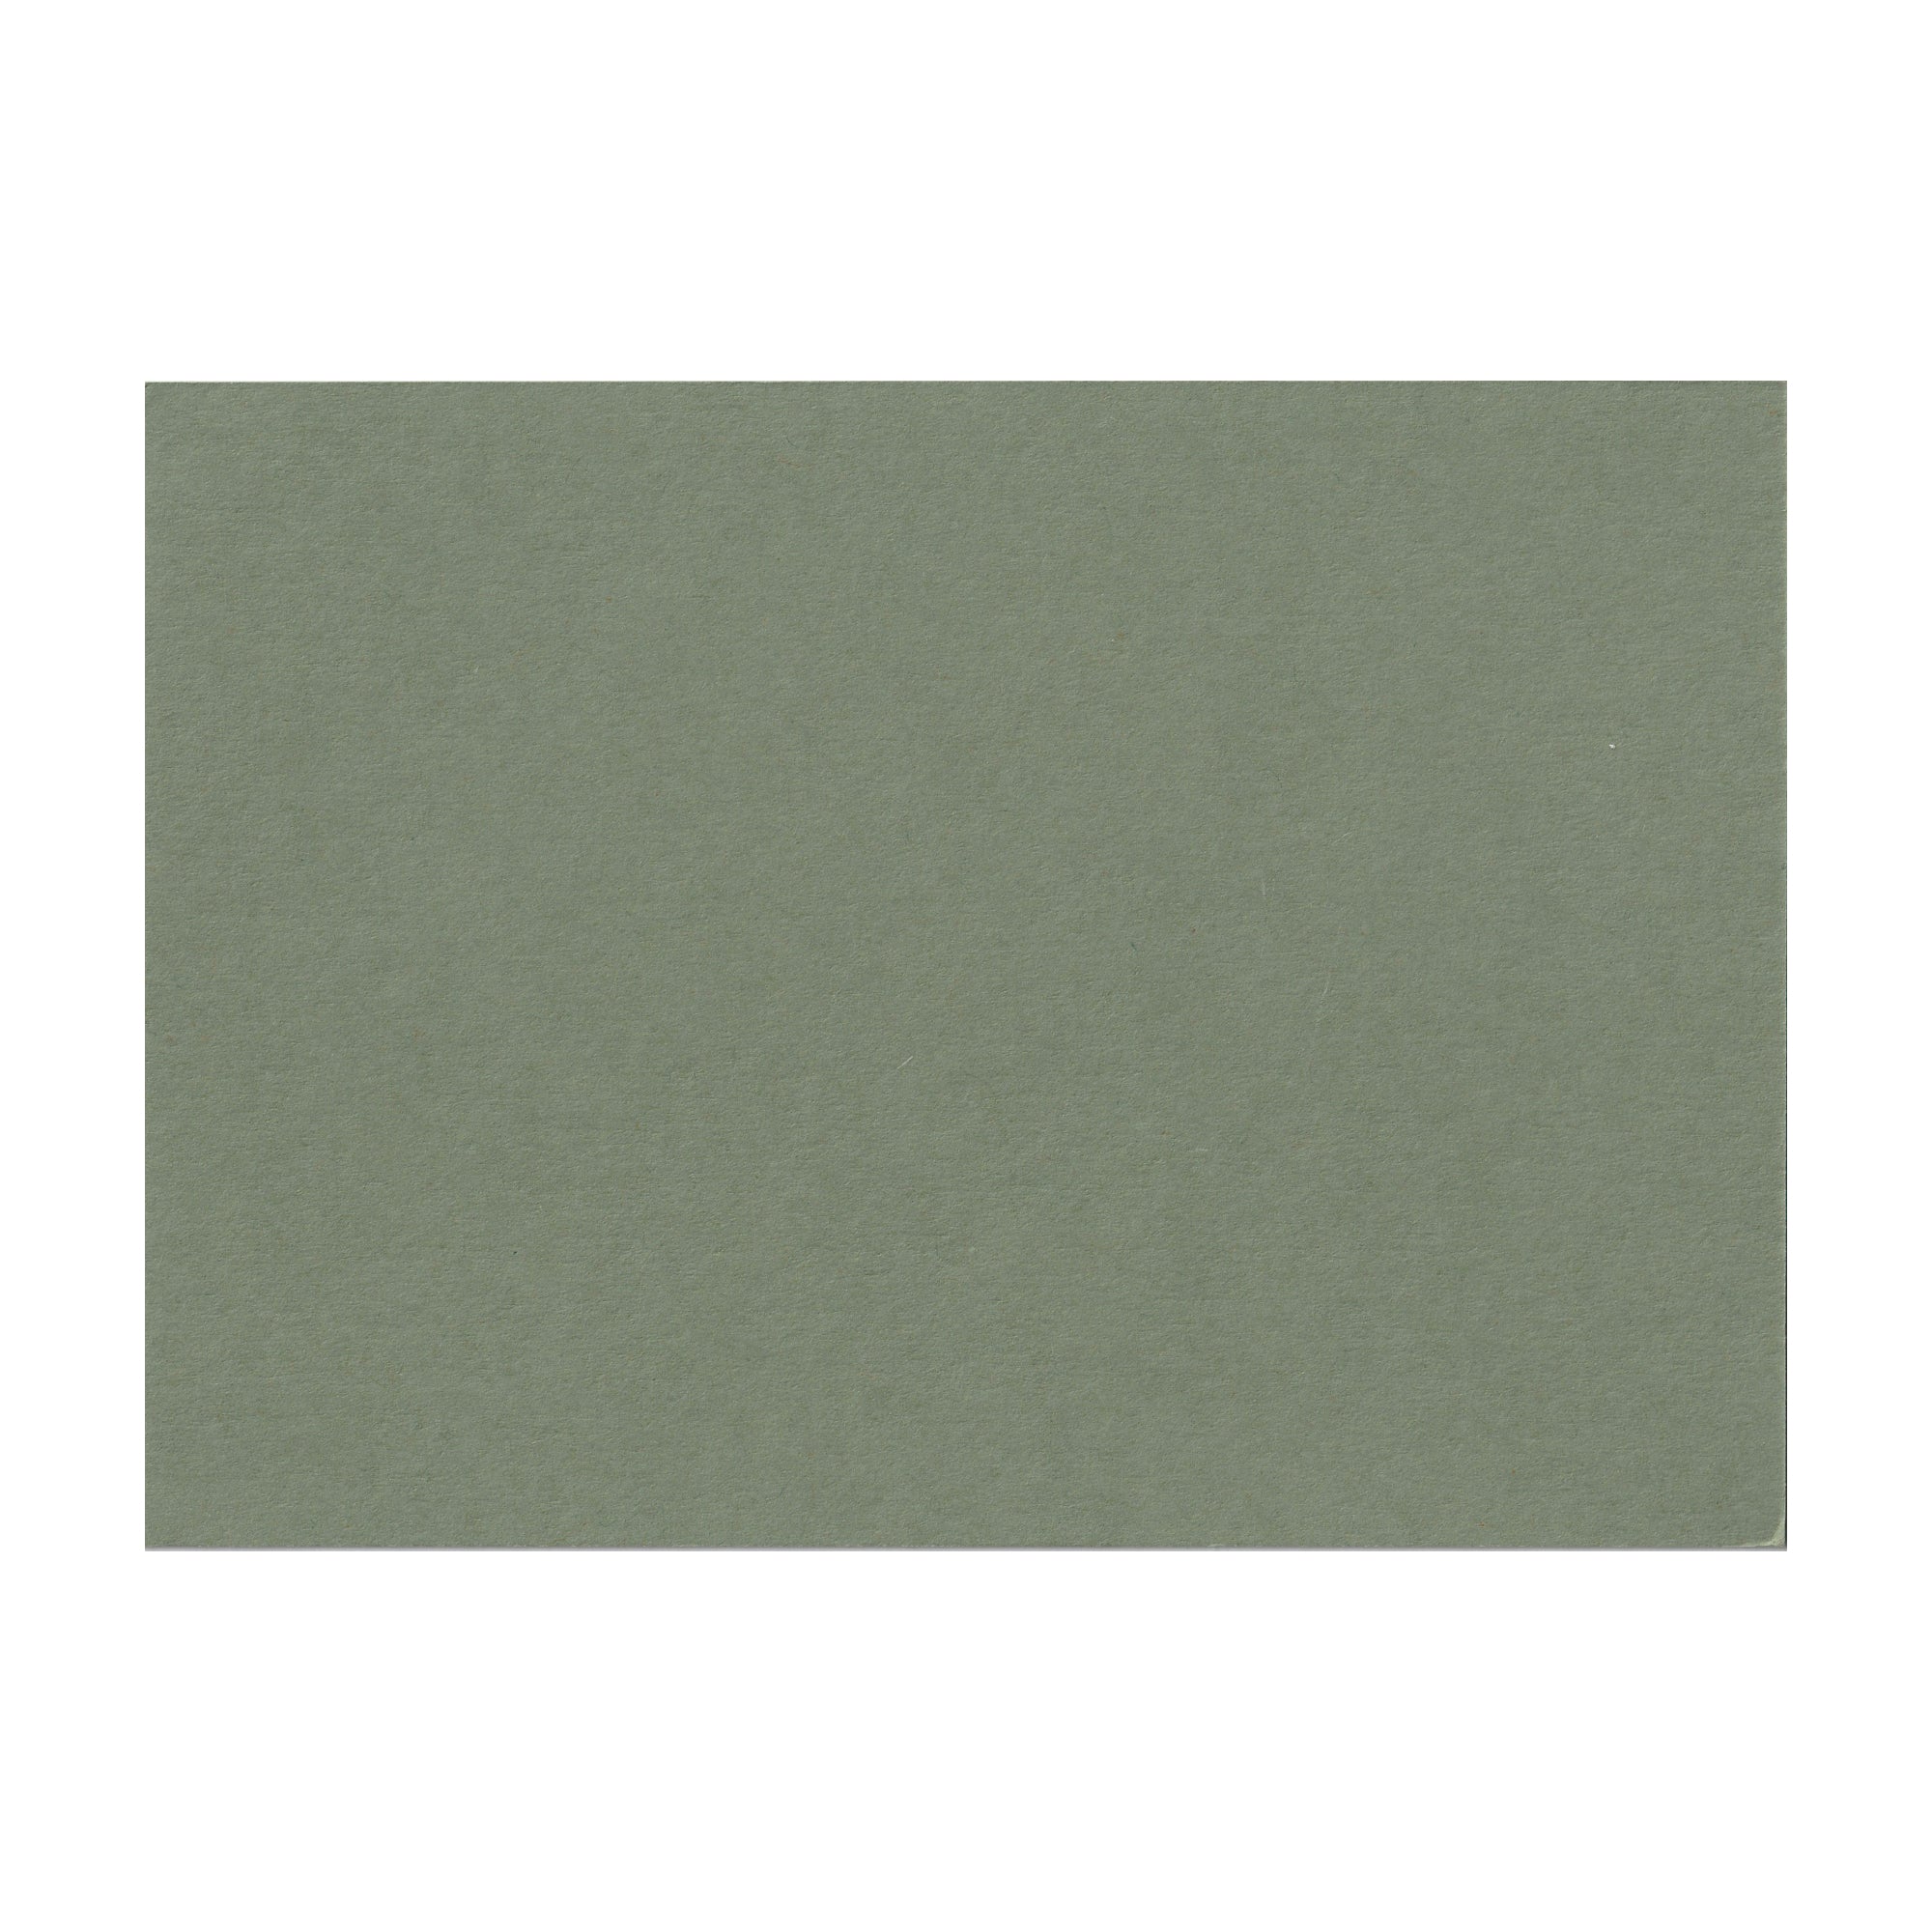 Plain Note Cards in Olive